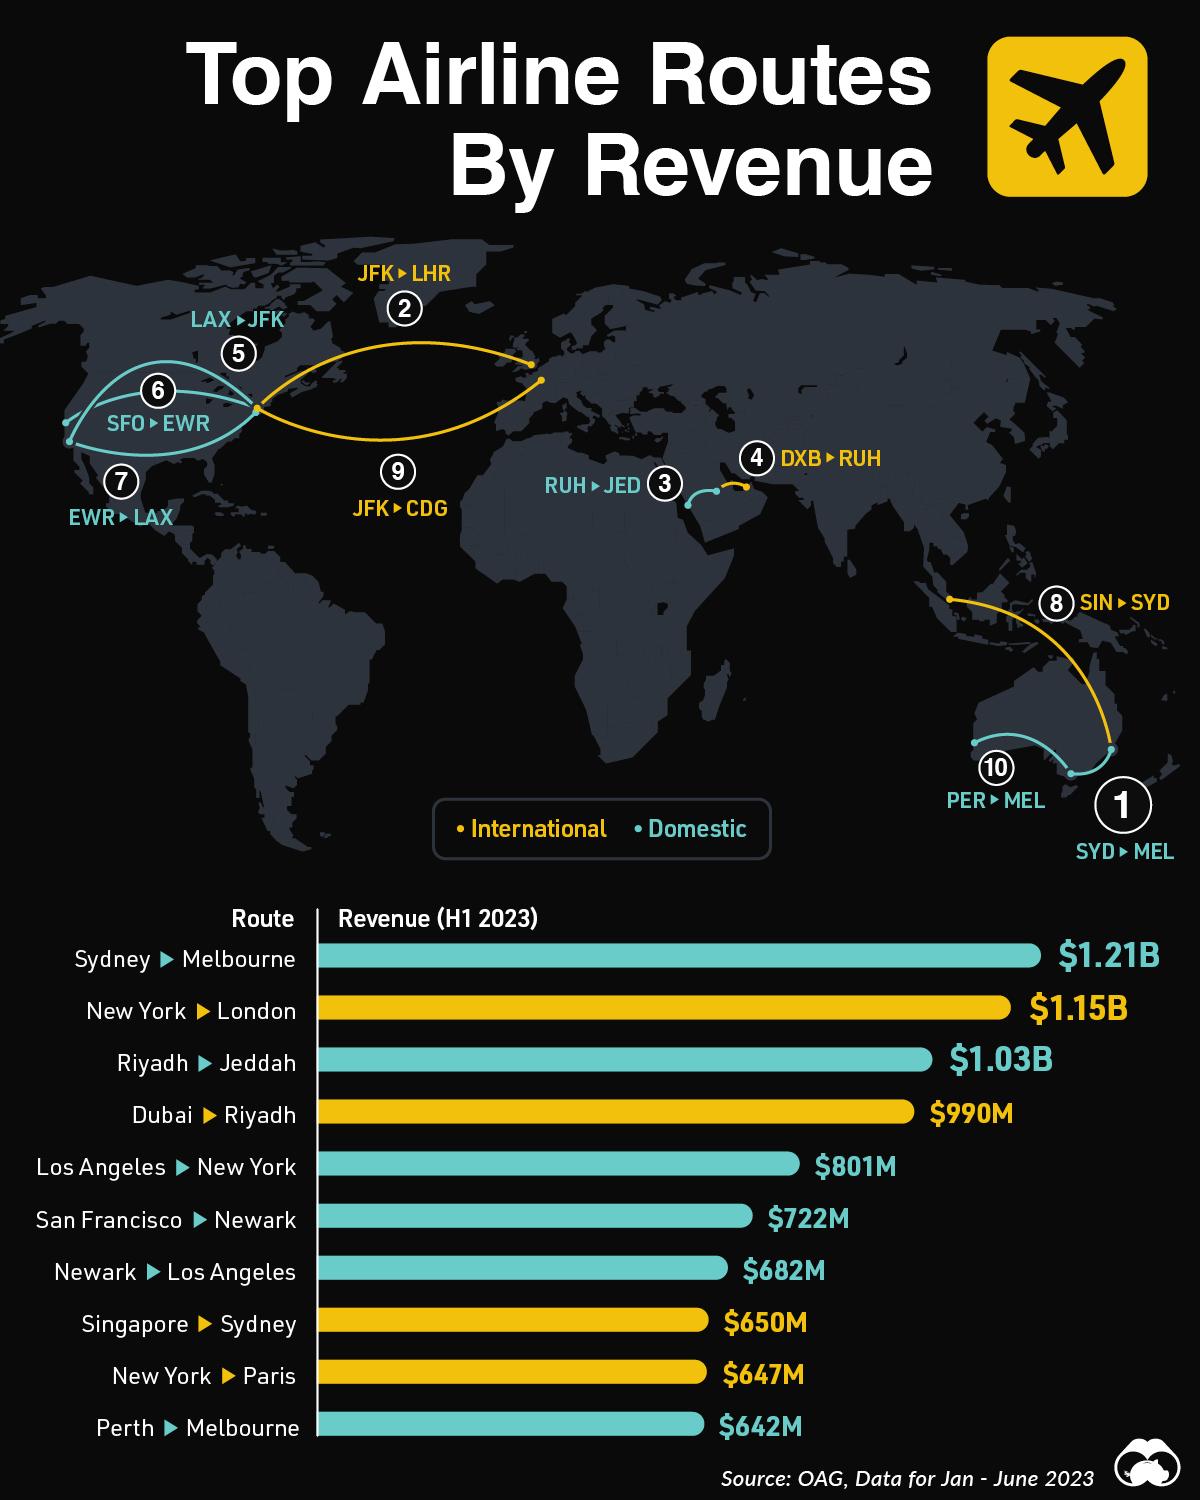 The Top Airline Routes by Revenue